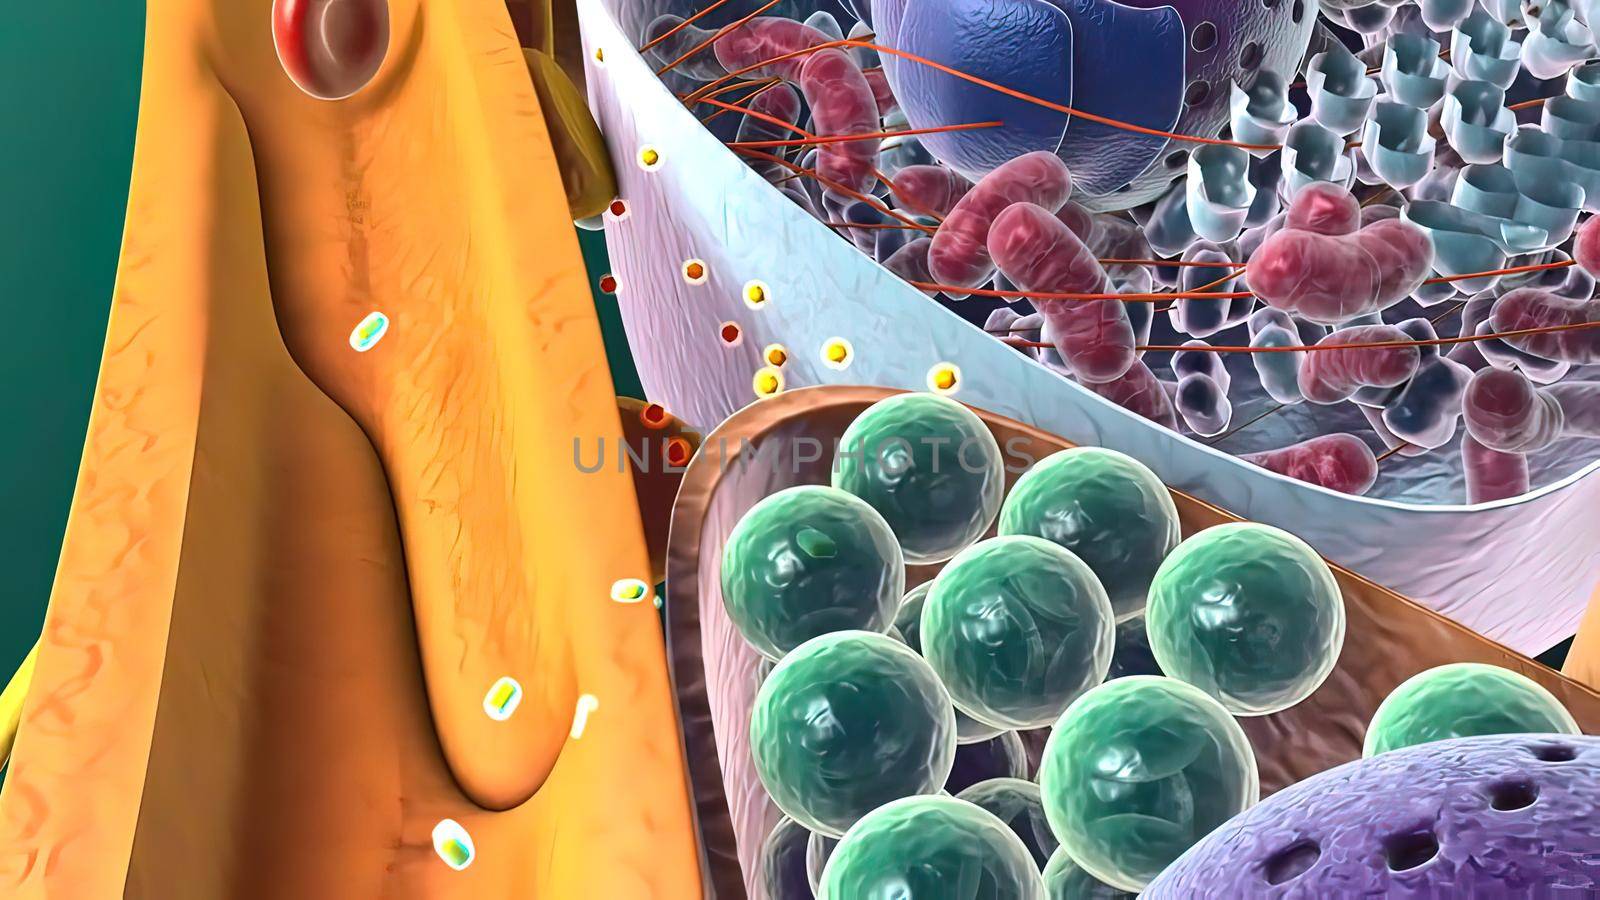 Amyloid Precursor Protein Cleavage, 3d medical illustration by creativepic